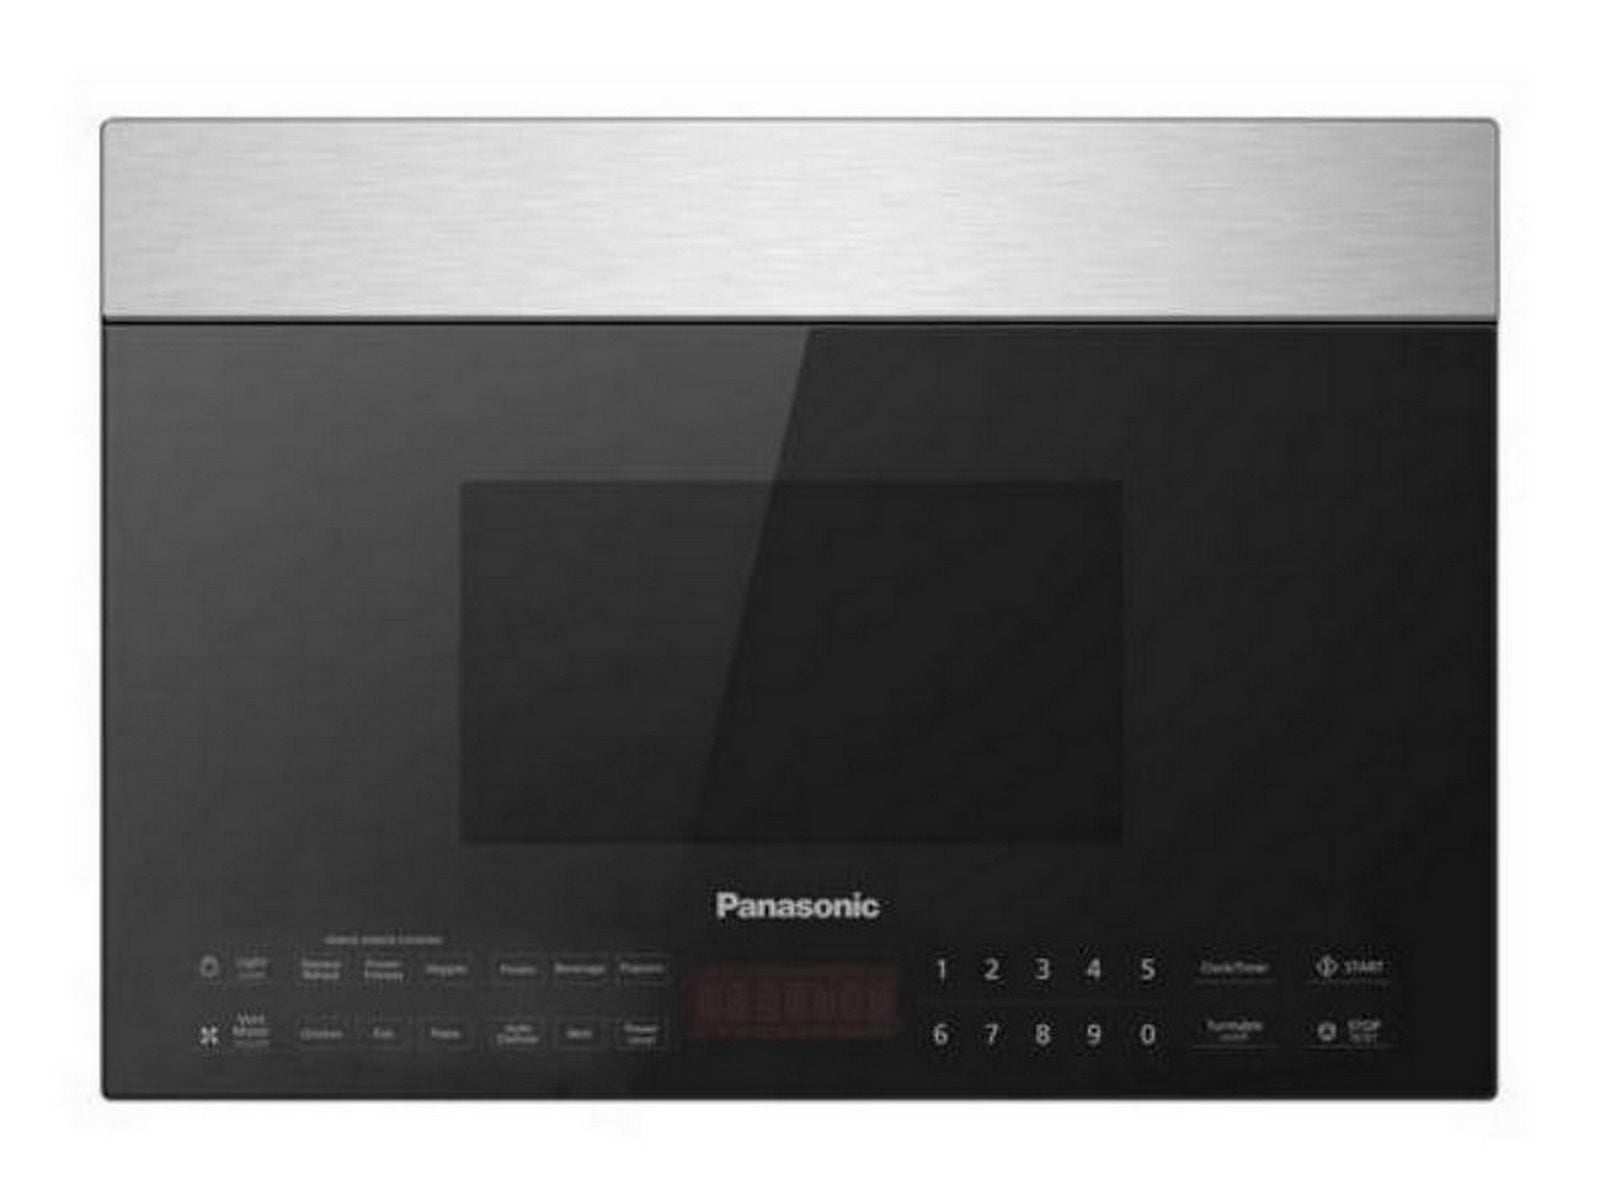 Panasonic - 1.4 cu. Ft  Over the range Microwave in Stainless - NNSG138S